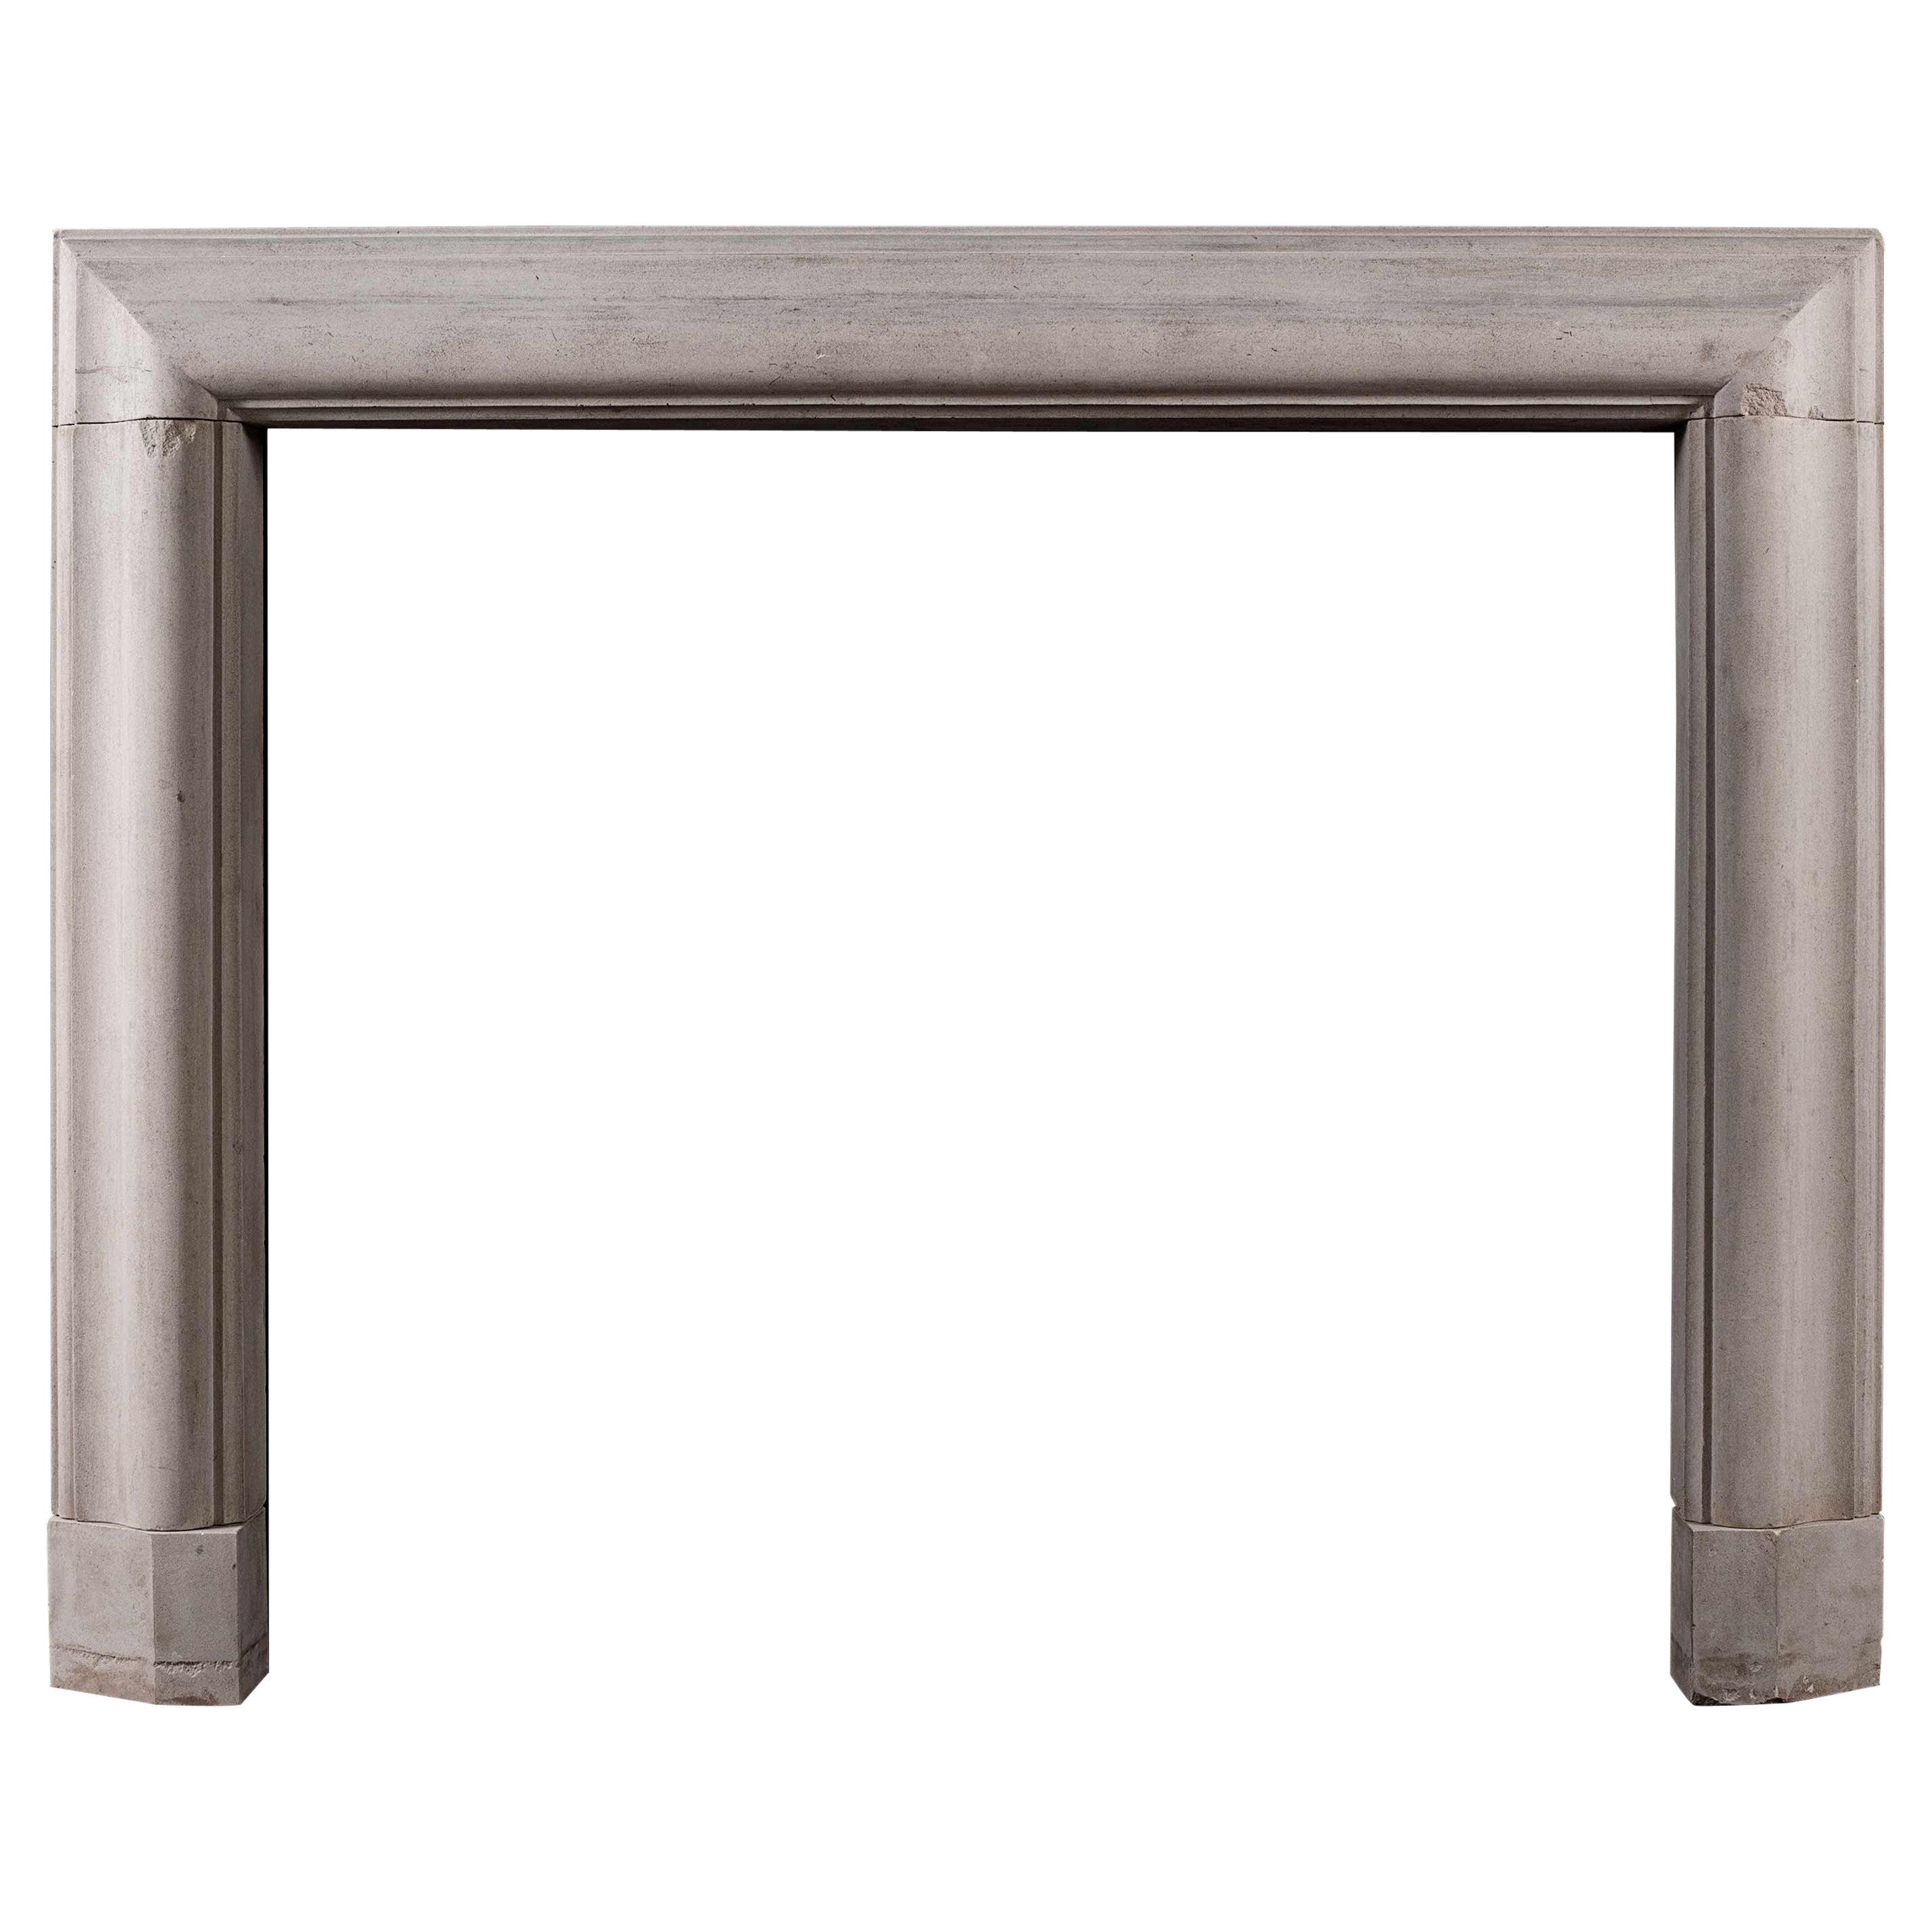 English Bolection Fireplace in Portland Stone For Sale